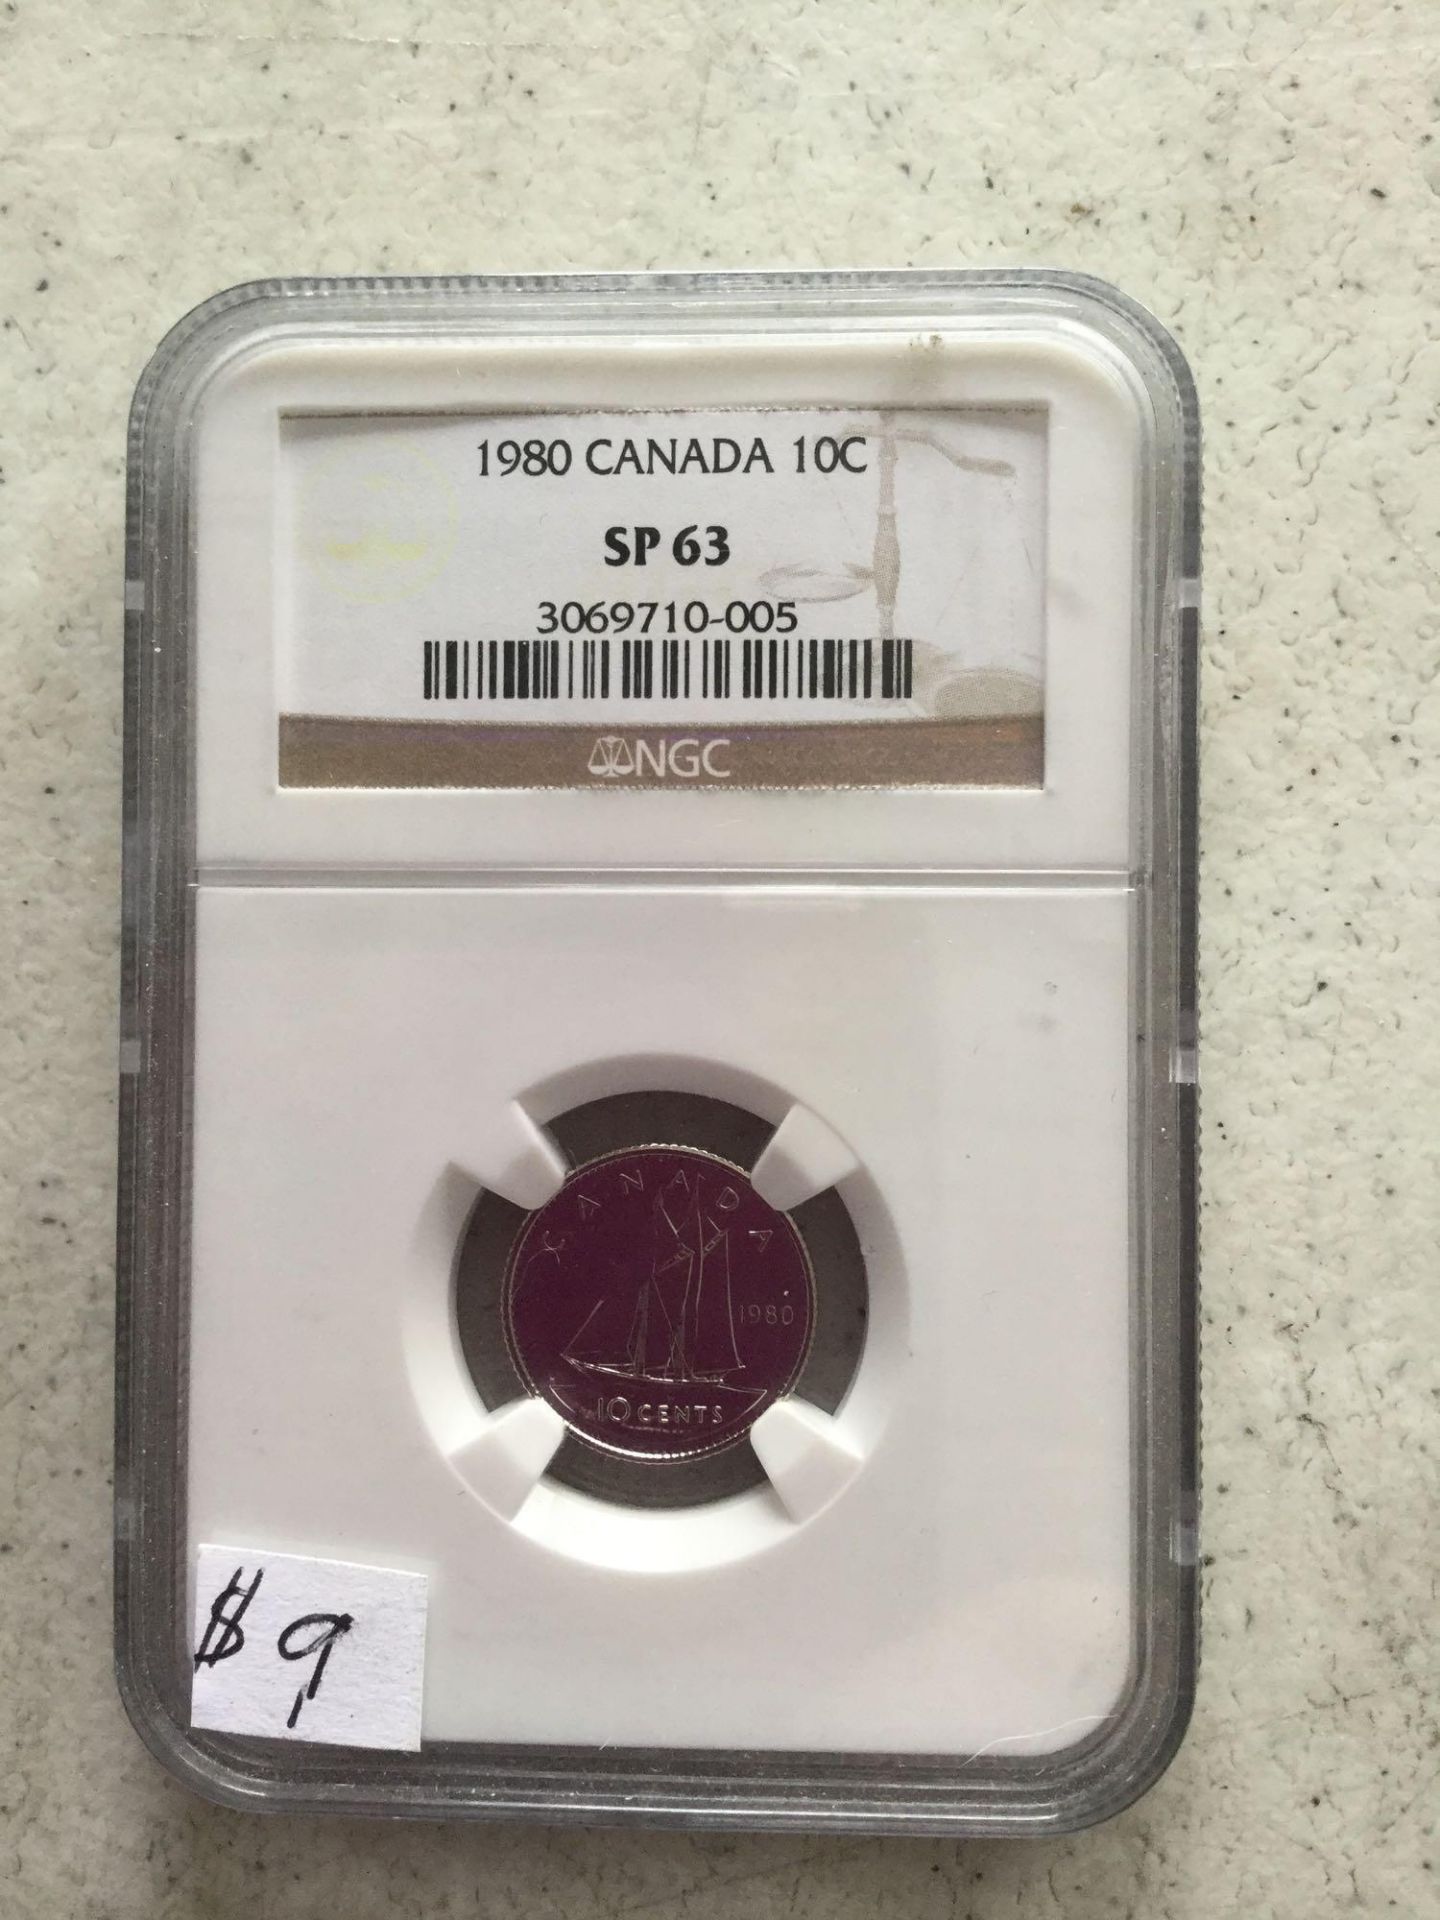 Canada 1980 10 Cent Coin SP-63